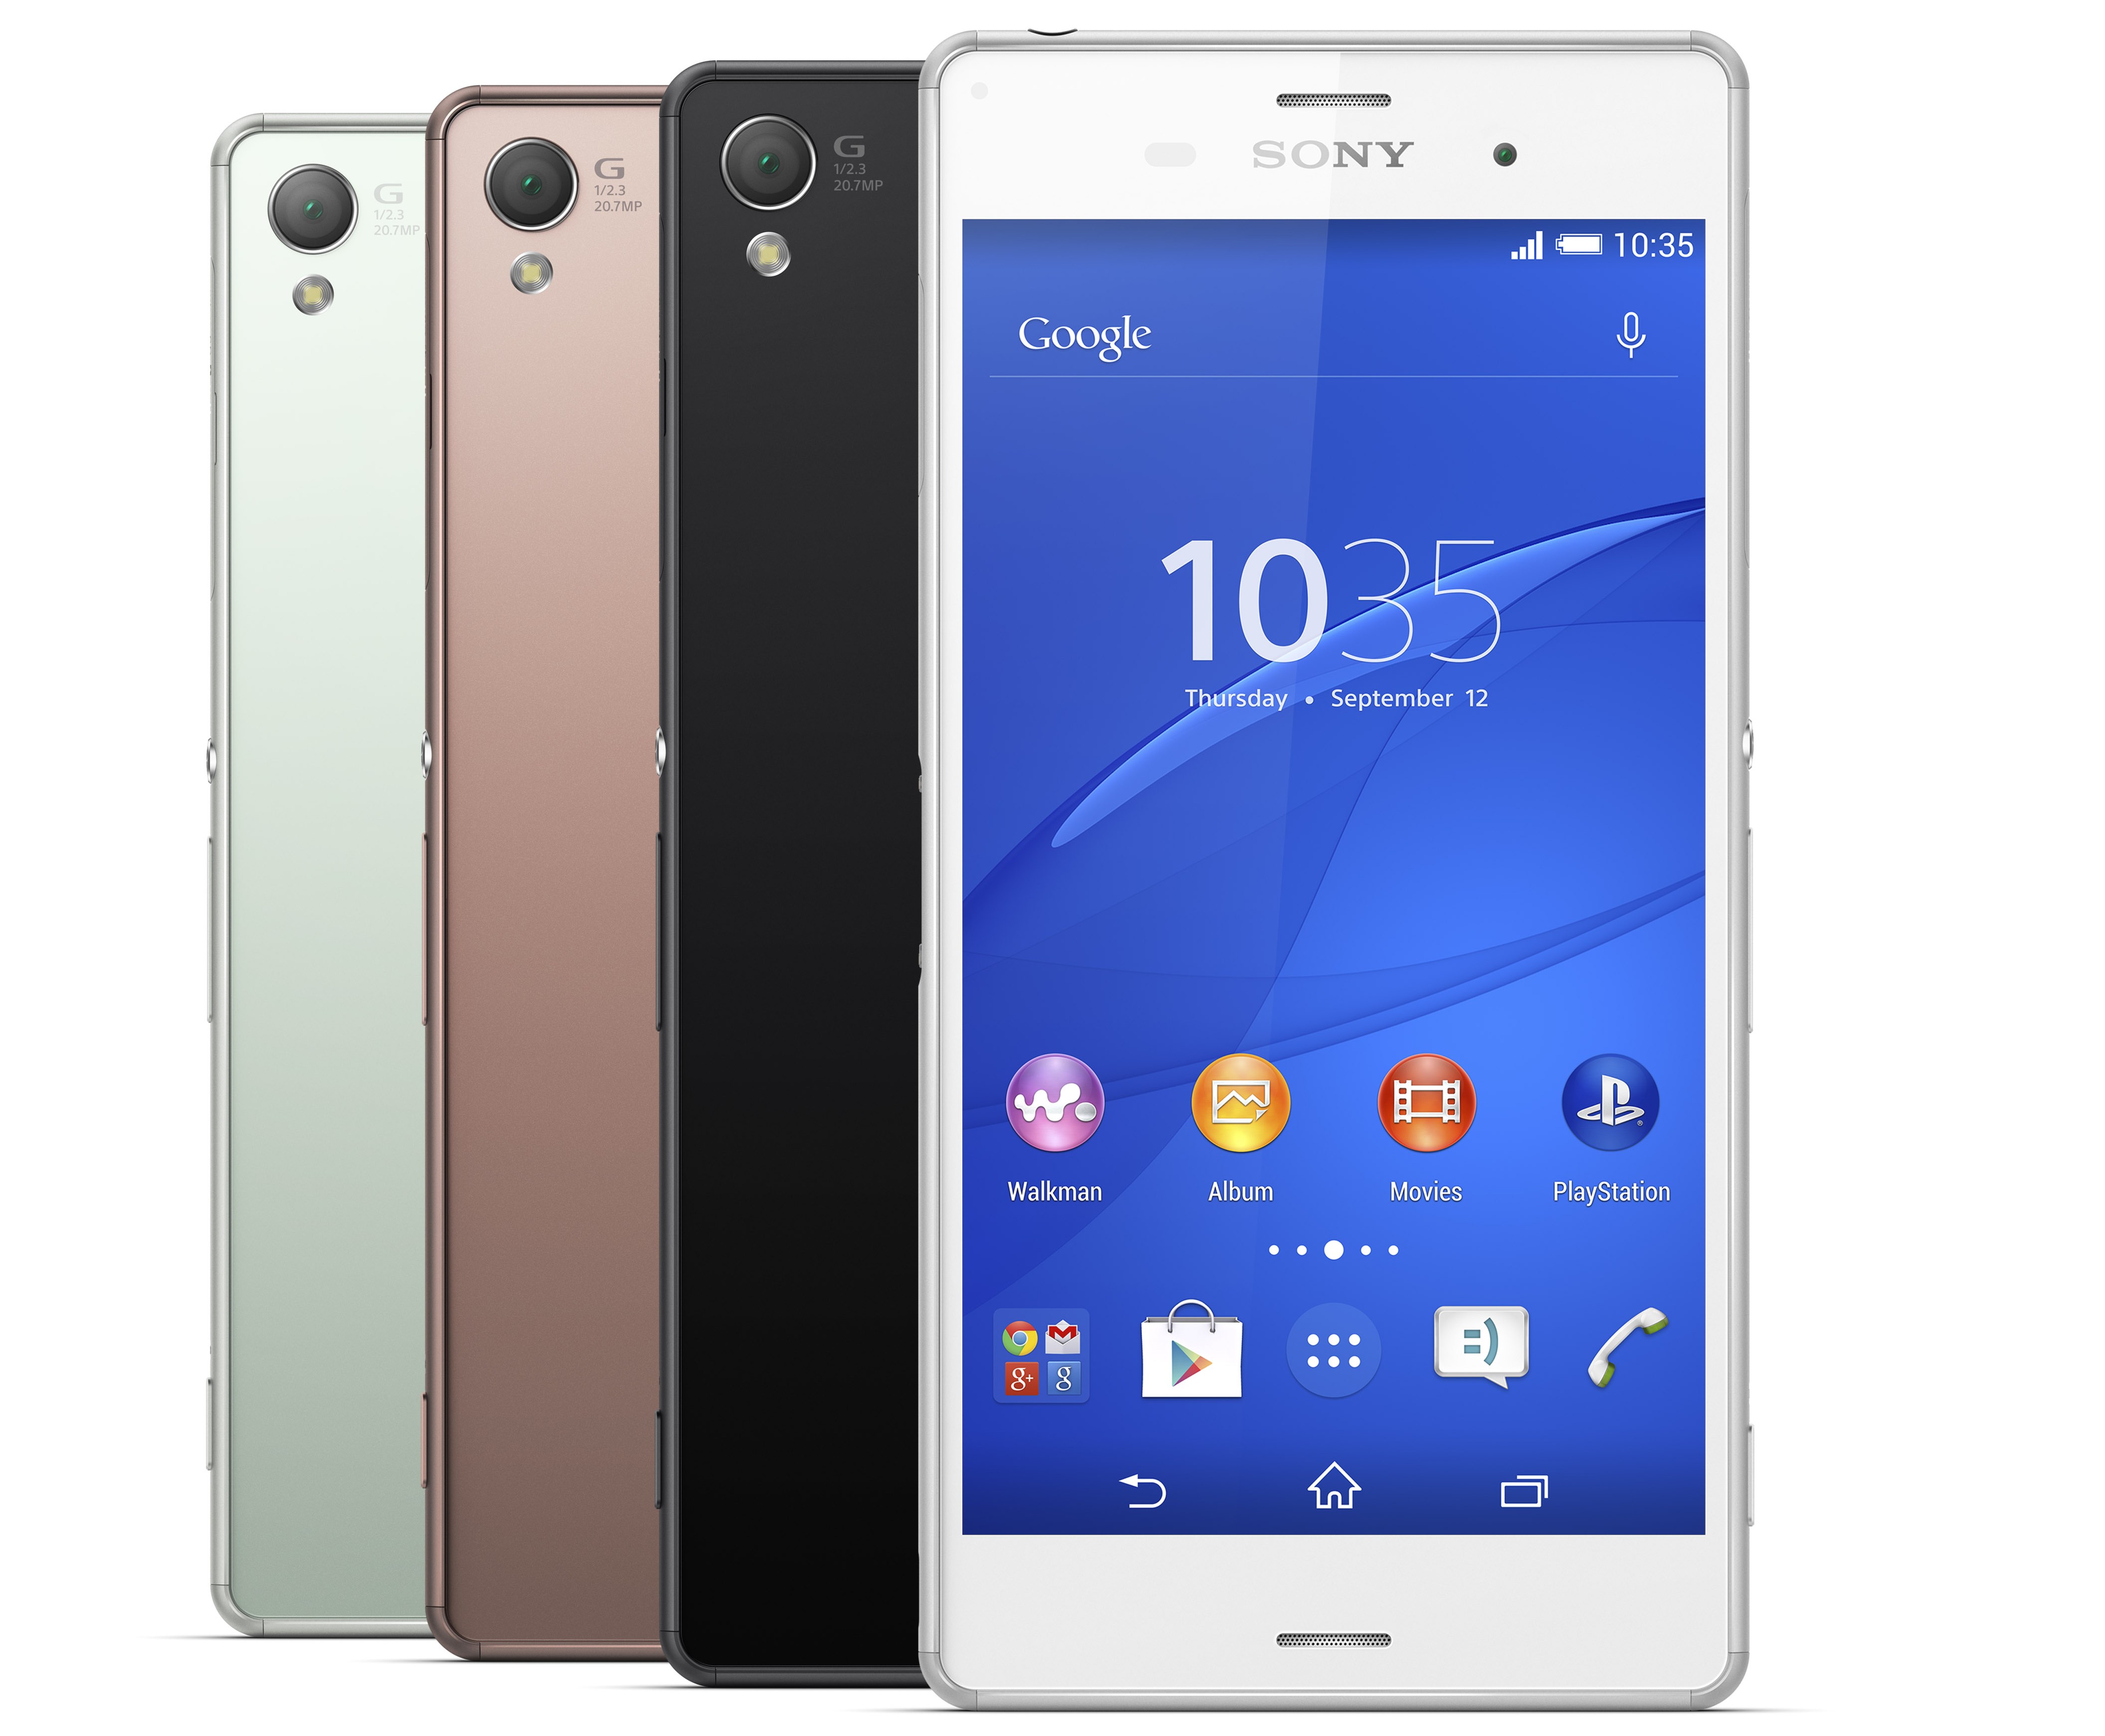 Sony launches trio of flagship devices: Z3, Z3 Compact, and Z3 Tablet